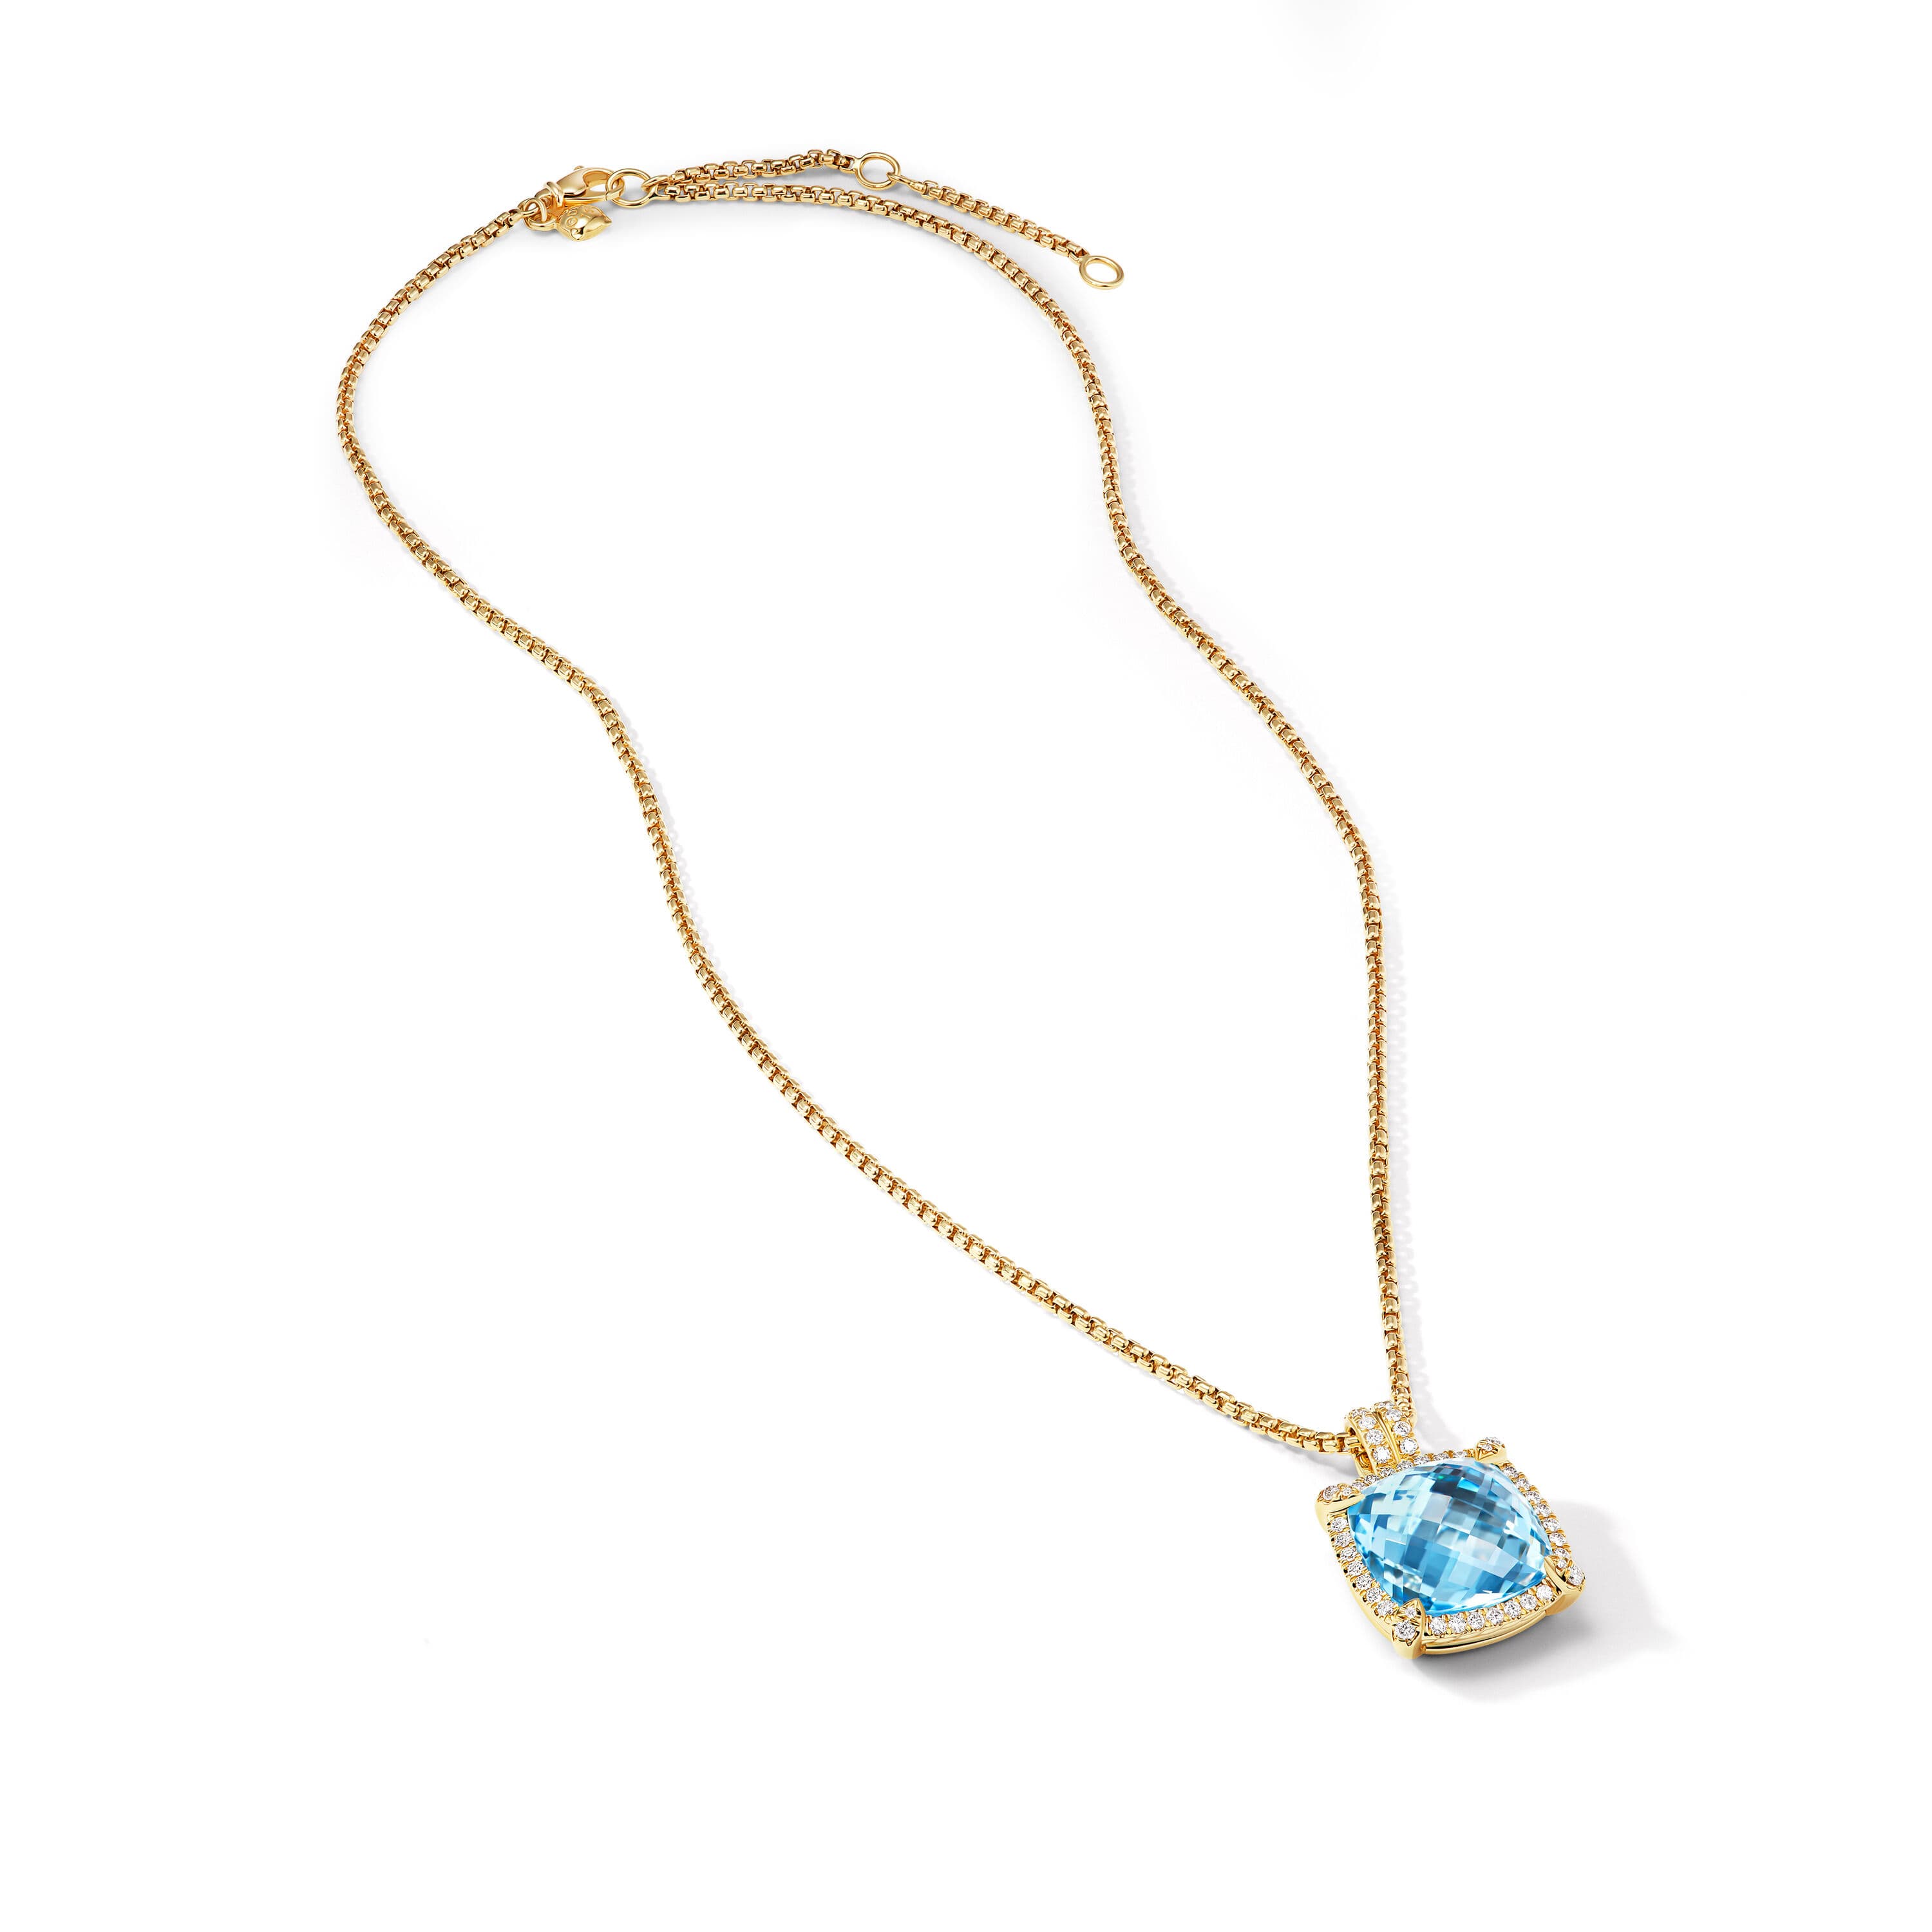 David Yurman Chatelaine Pave Bezel Pendant Necklace in 18K Yellow Gold with Blue Topaz and Diamonds 1